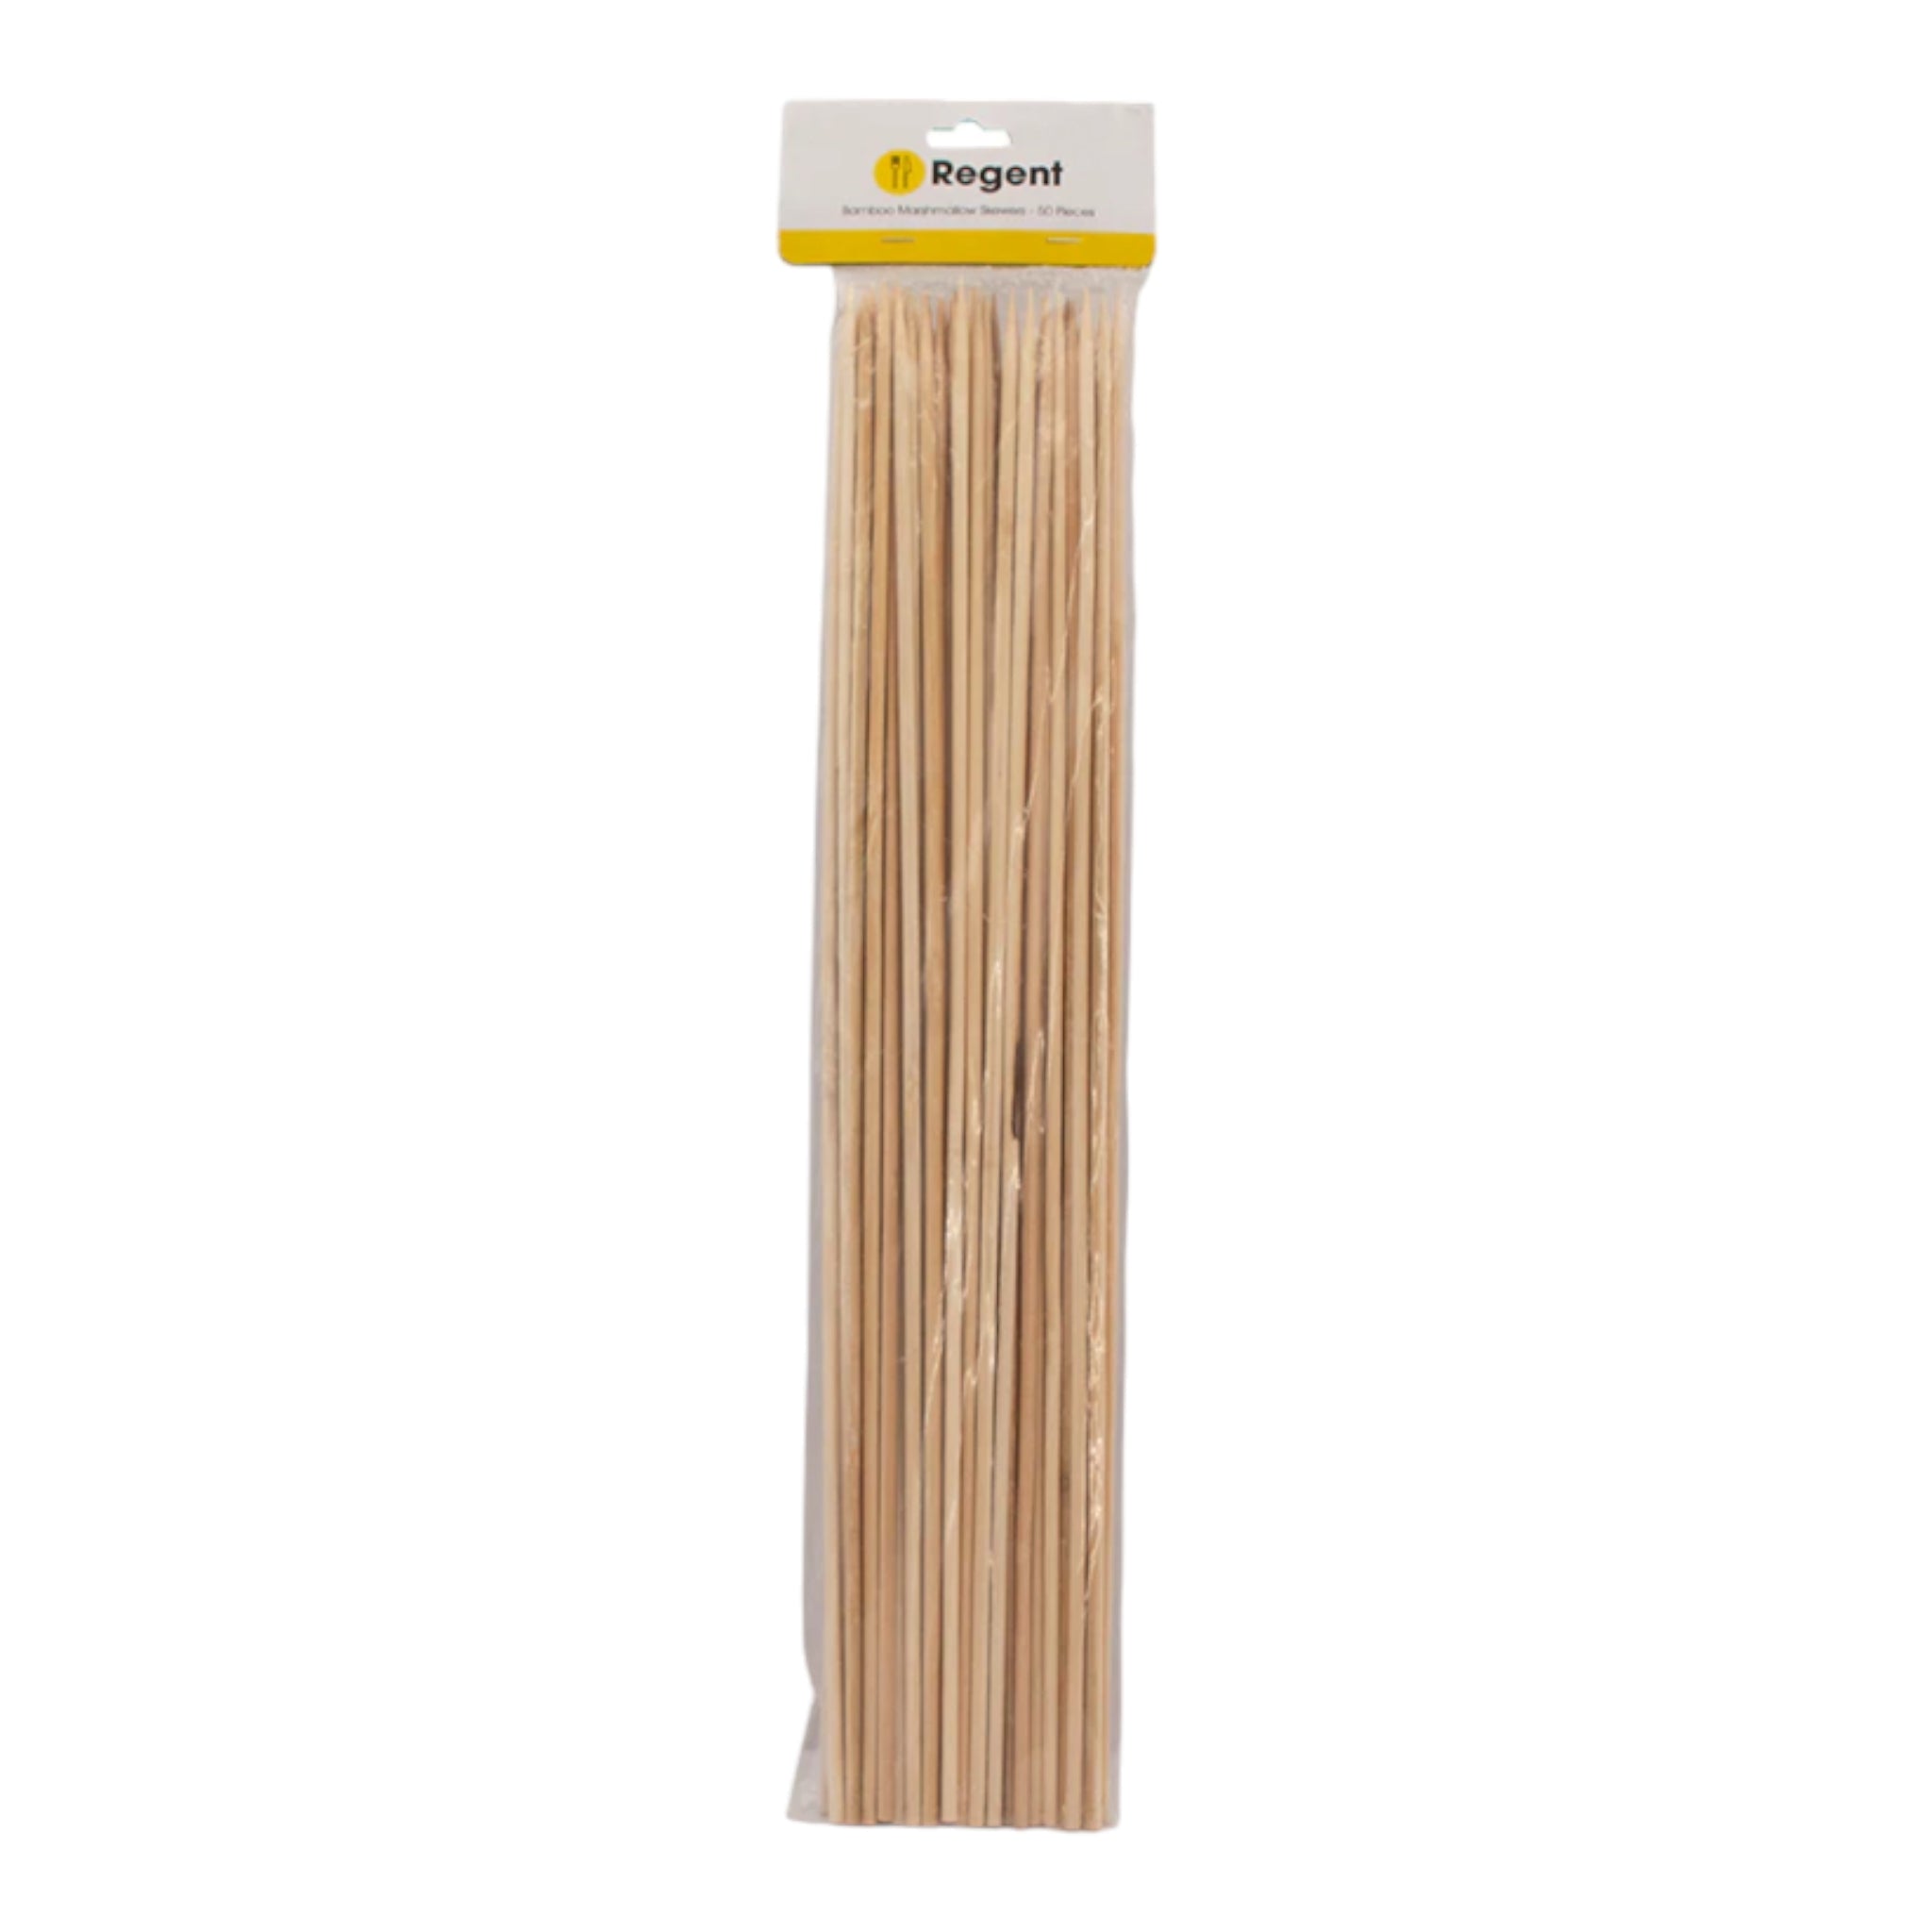 Regent Kitchen Marshmallow Bamboo Skewers 400x4mm 50pack